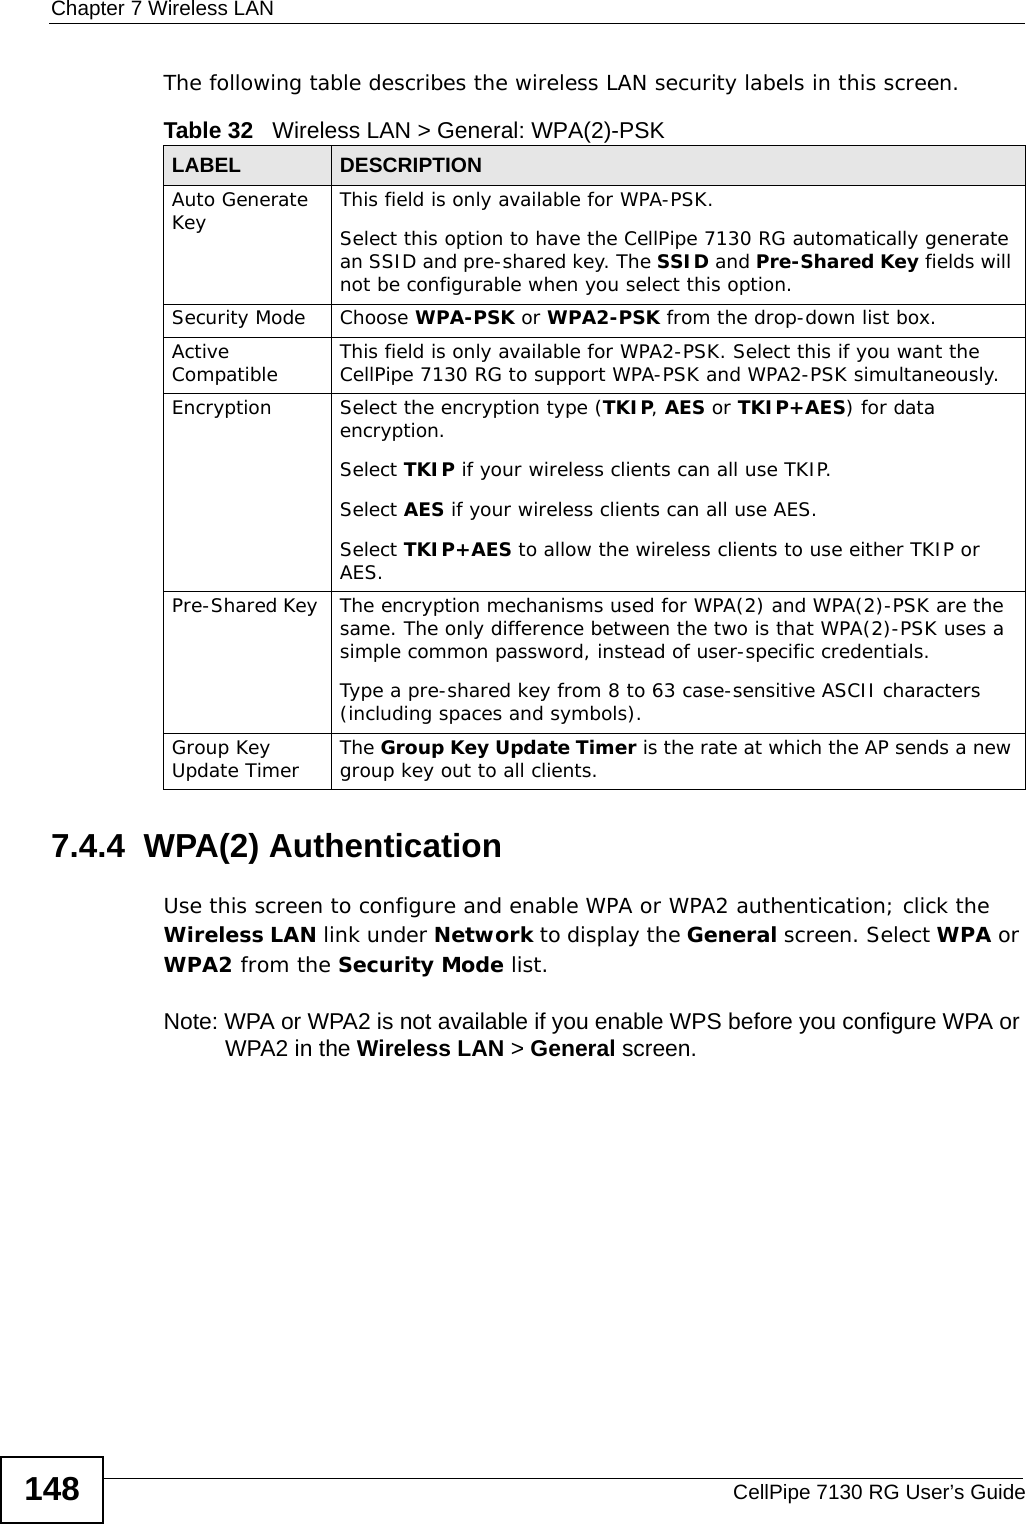 Chapter 7 Wireless LANCellPipe 7130 RG User’s Guide148The following table describes the wireless LAN security labels in this screen.7.4.4  WPA(2) AuthenticationUse this screen to configure and enable WPA or WPA2 authentication; click the Wireless LAN link under Network to display the General screen. Select WPA or WPA2 from the Security Mode list. Note: WPA or WPA2 is not available if you enable WPS before you configure WPA or WPA2 in the Wireless LAN &gt; General screen.Table 32   Wireless LAN &gt; General: WPA(2)-PSKLABEL DESCRIPTIONAuto Generate Key This field is only available for WPA-PSK.Select this option to have the CellPipe 7130 RG automatically generate an SSID and pre-shared key. The SSID and Pre-Shared Key fields will not be configurable when you select this option.Security Mode Choose WPA-PSK or WPA2-PSK from the drop-down list box.Active Compatible This field is only available for WPA2-PSK. Select this if you want the CellPipe 7130 RG to support WPA-PSK and WPA2-PSK simultaneously.Encryption Select the encryption type (TKIP, AES or TKIP+AES) for data encryption.Select TKIP if your wireless clients can all use TKIP.Select AES if your wireless clients can all use AES.Select TKIP+AES to allow the wireless clients to use either TKIP or AES.Pre-Shared Key  The encryption mechanisms used for WPA(2) and WPA(2)-PSK are the same. The only difference between the two is that WPA(2)-PSK uses a simple common password, instead of user-specific credentials.Type a pre-shared key from 8 to 63 case-sensitive ASCII characters (including spaces and symbols).Group Key Update Timer The Group Key Update Timer is the rate at which the AP sends a new group key out to all clients. 